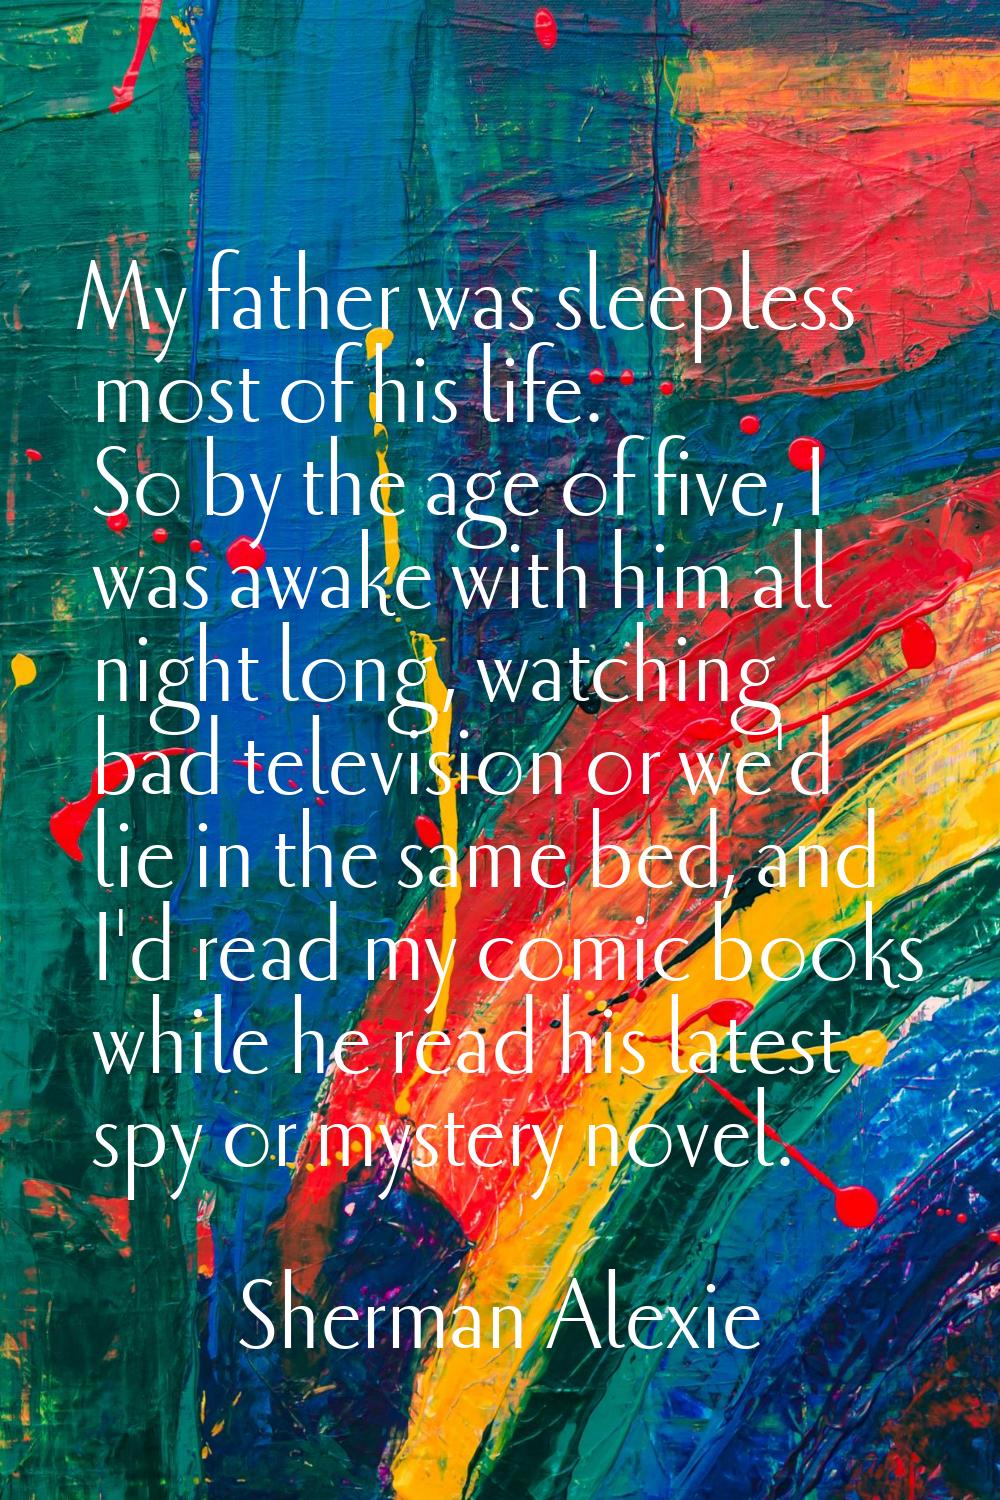 My father was sleepless most of his life. So by the age of five, I was awake with him all night lon